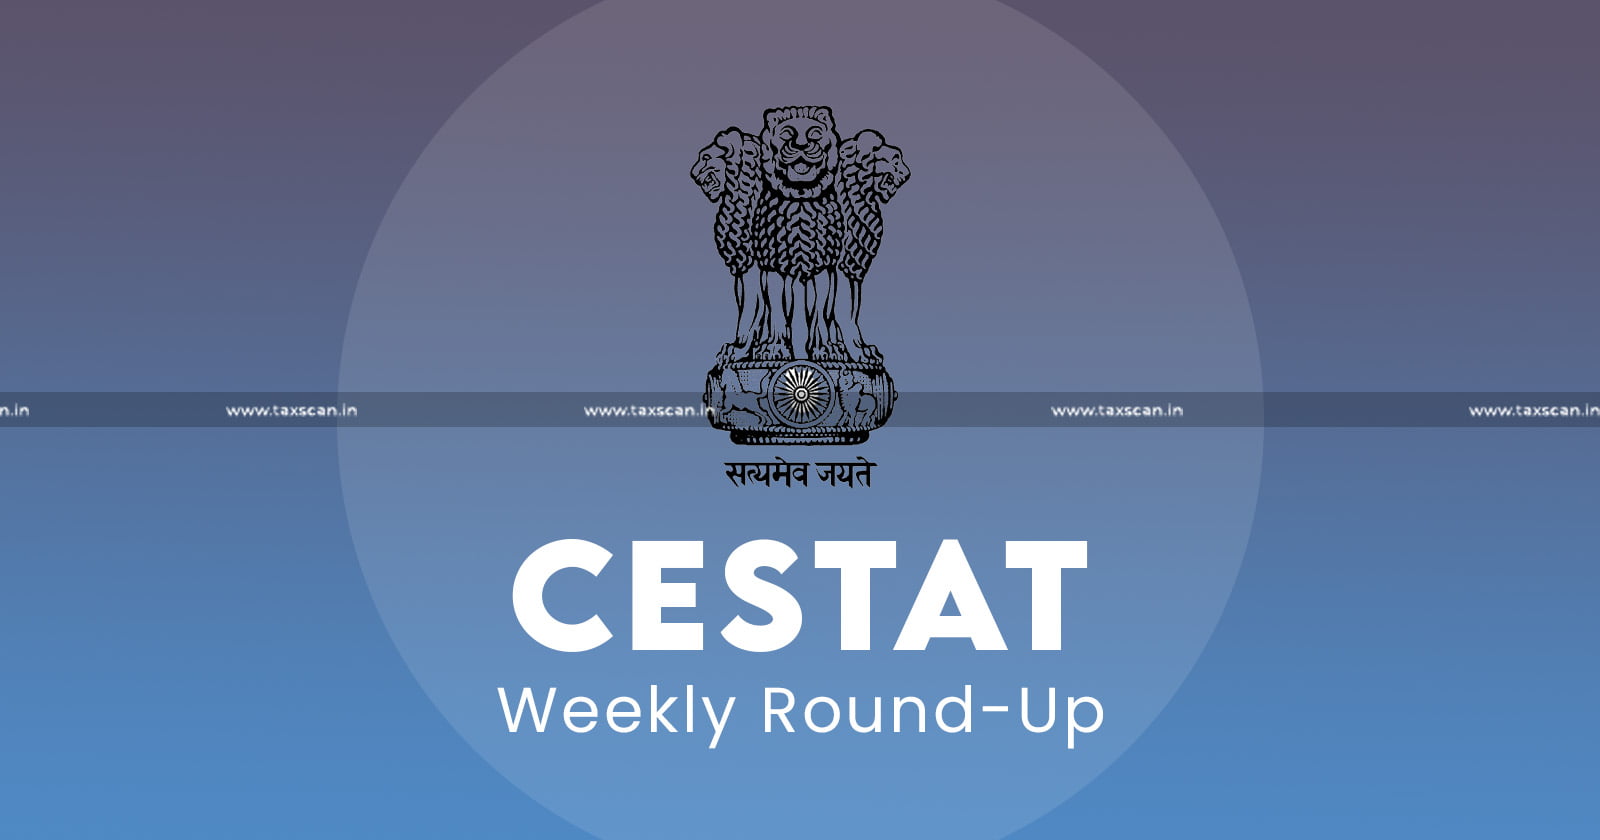 CESTAT WEEKLY ROUND - UP - TAXSCAN